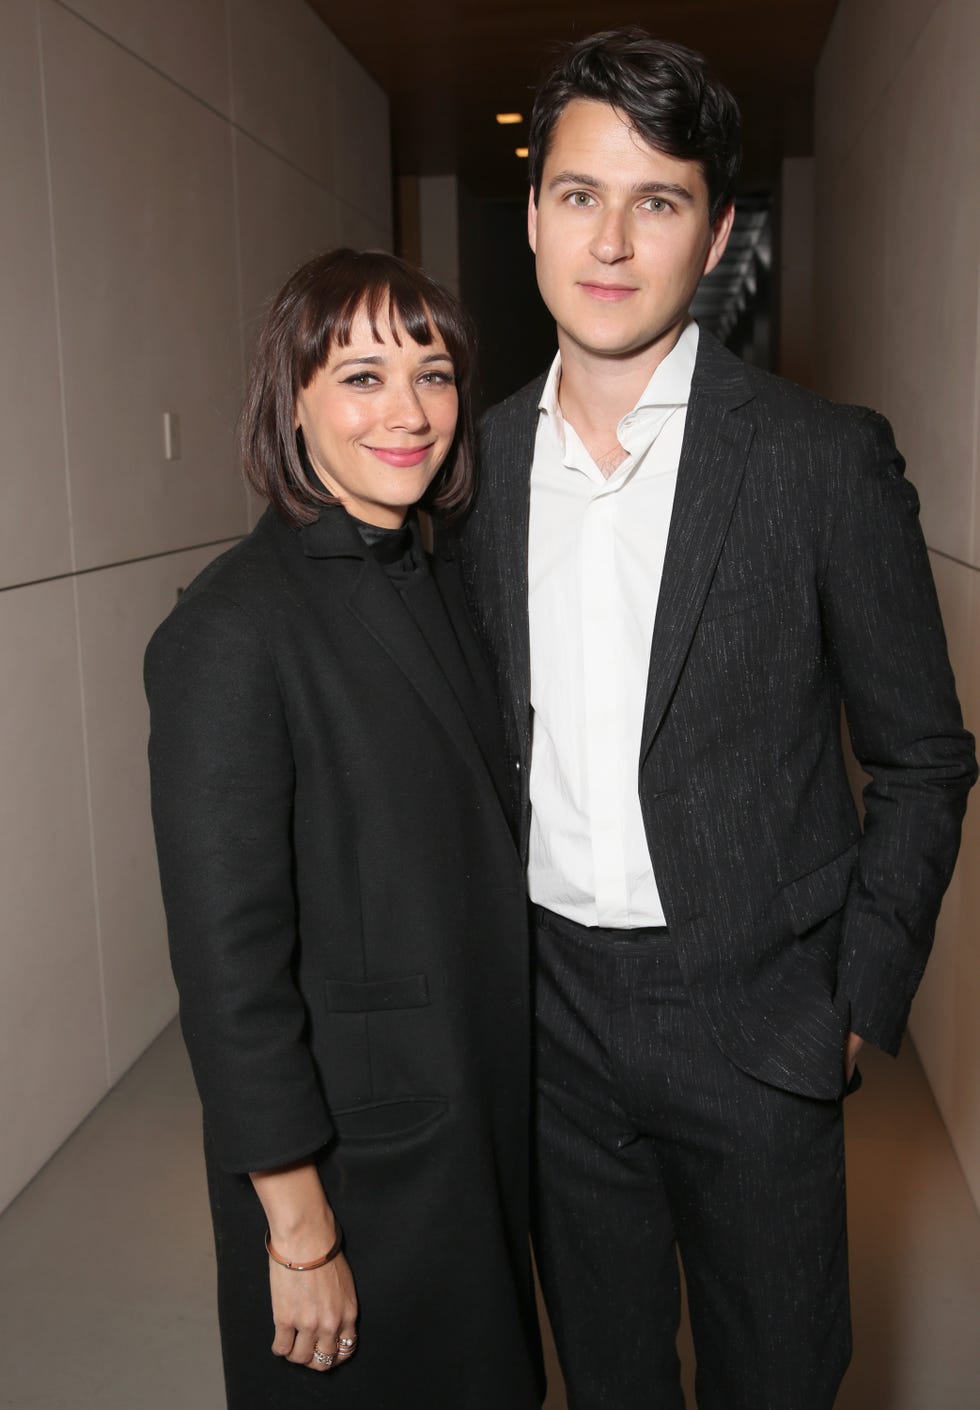 beverly hills, california march 24 actor rashida jones and musician ezra koenig attend ucla ioes celebration of the champions of our planets future on march 24, 2016 in beverly hills, california photo by todd williamsongetty images